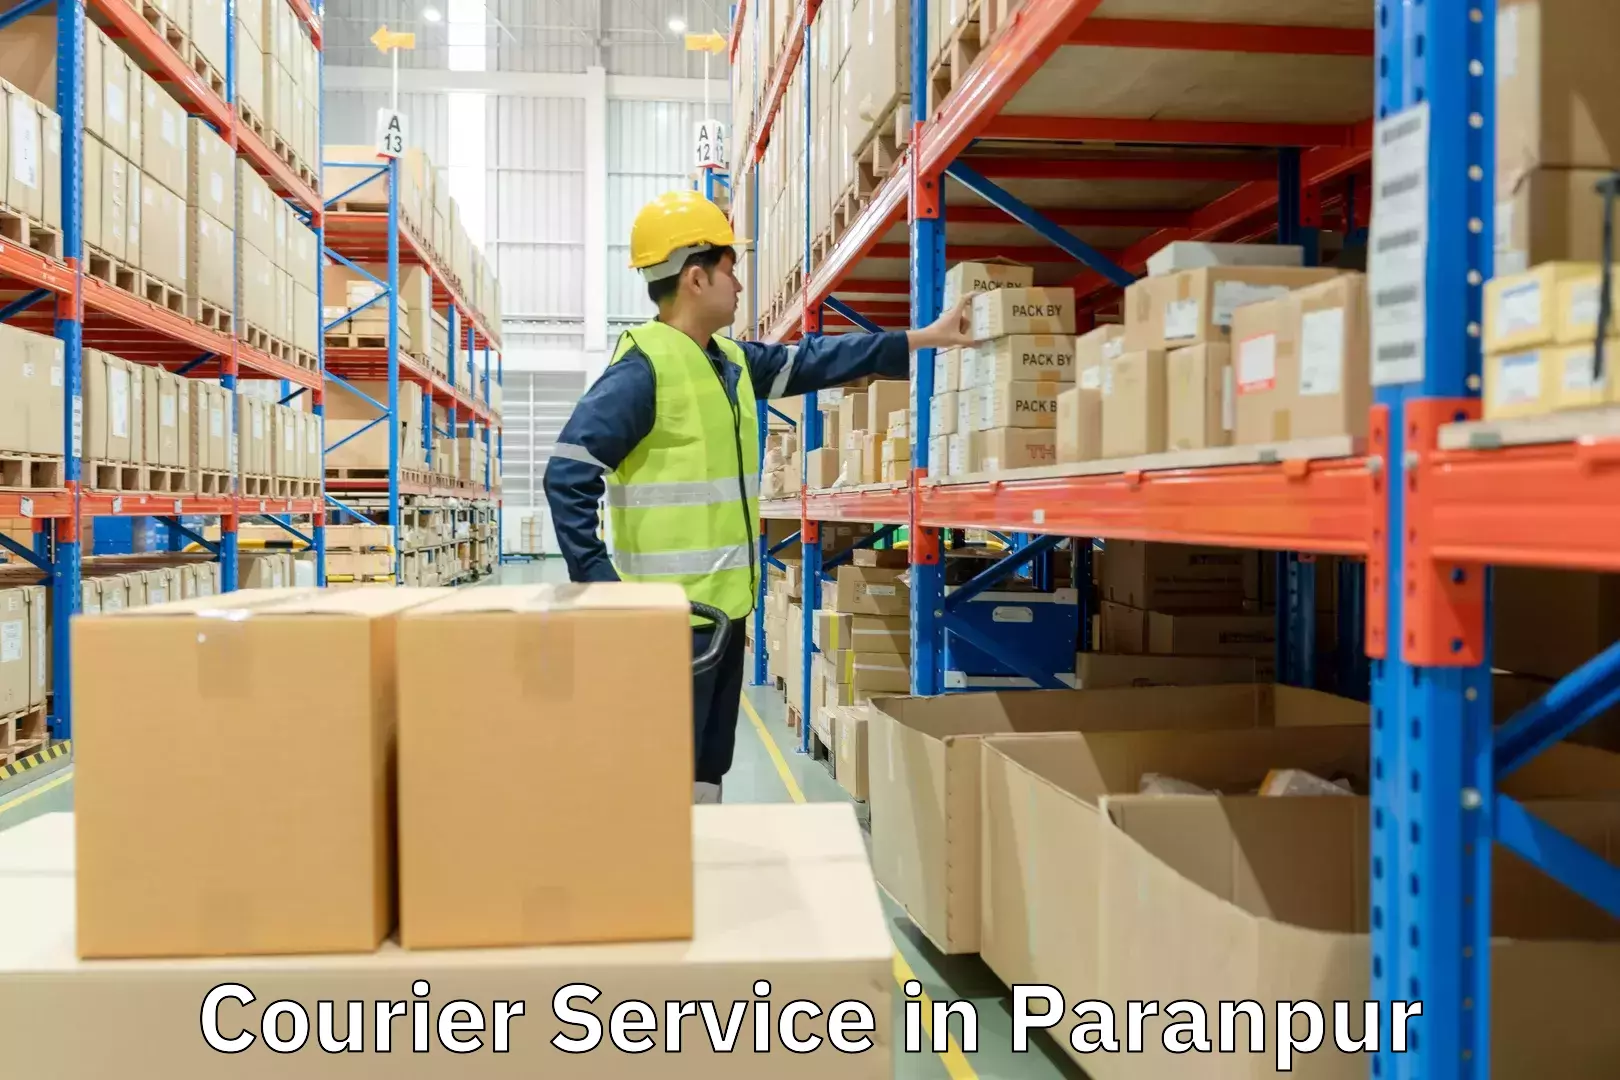 Budget-friendly shipping in Paranpur